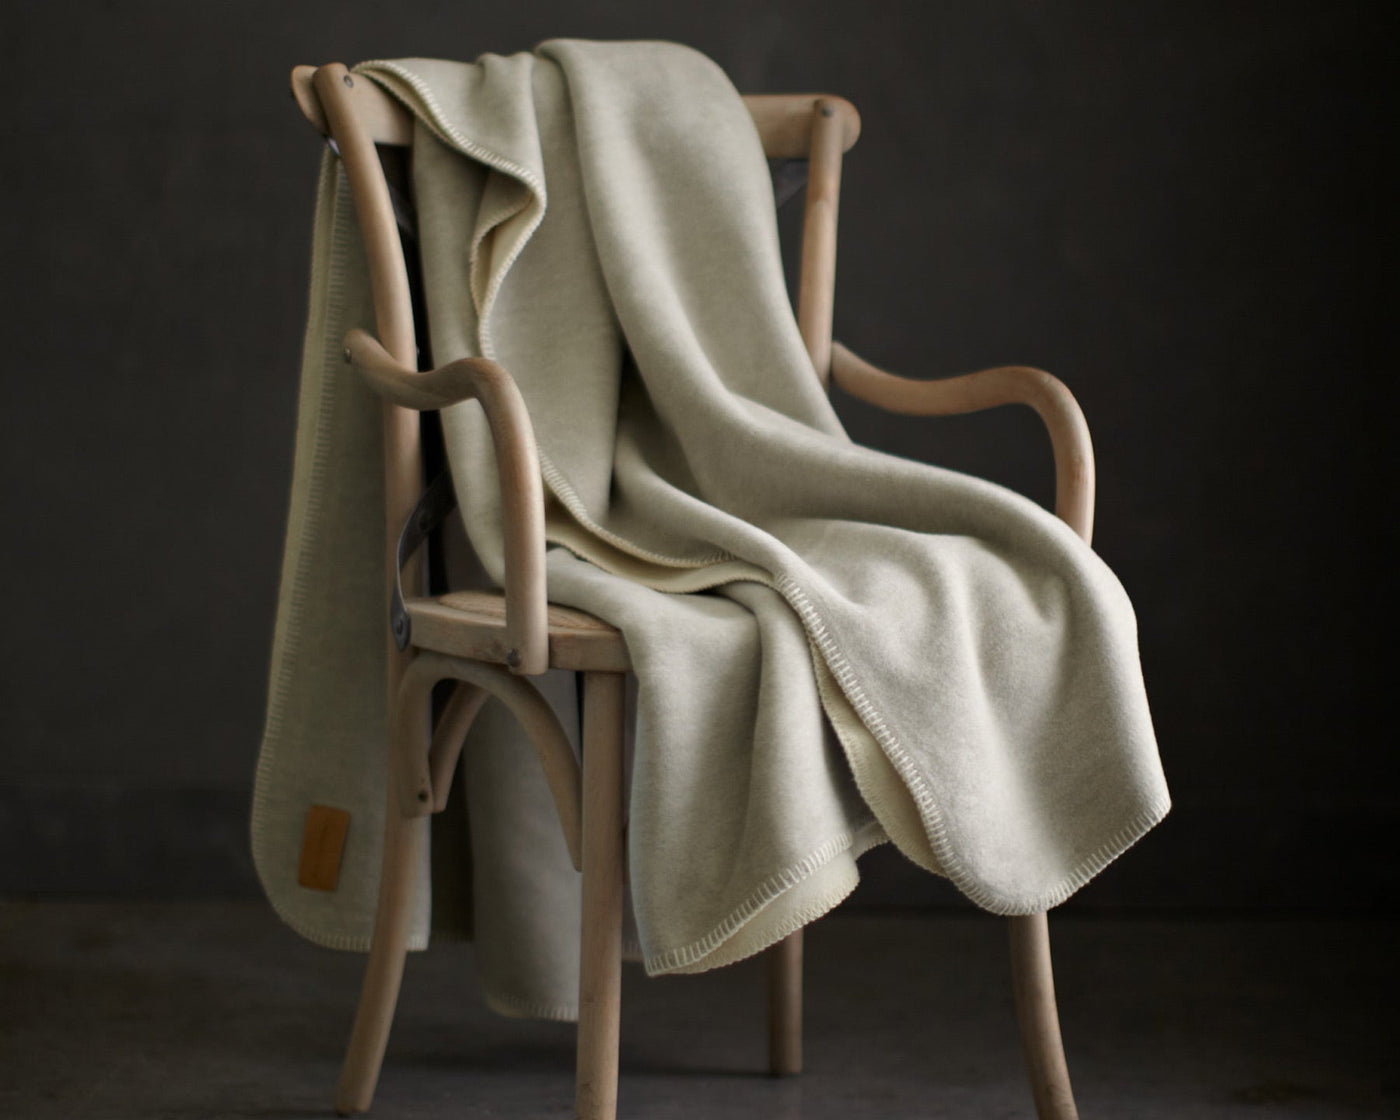 Reversible whipstitch cotton blend blanket Alta by Peacock Alley draped over chair